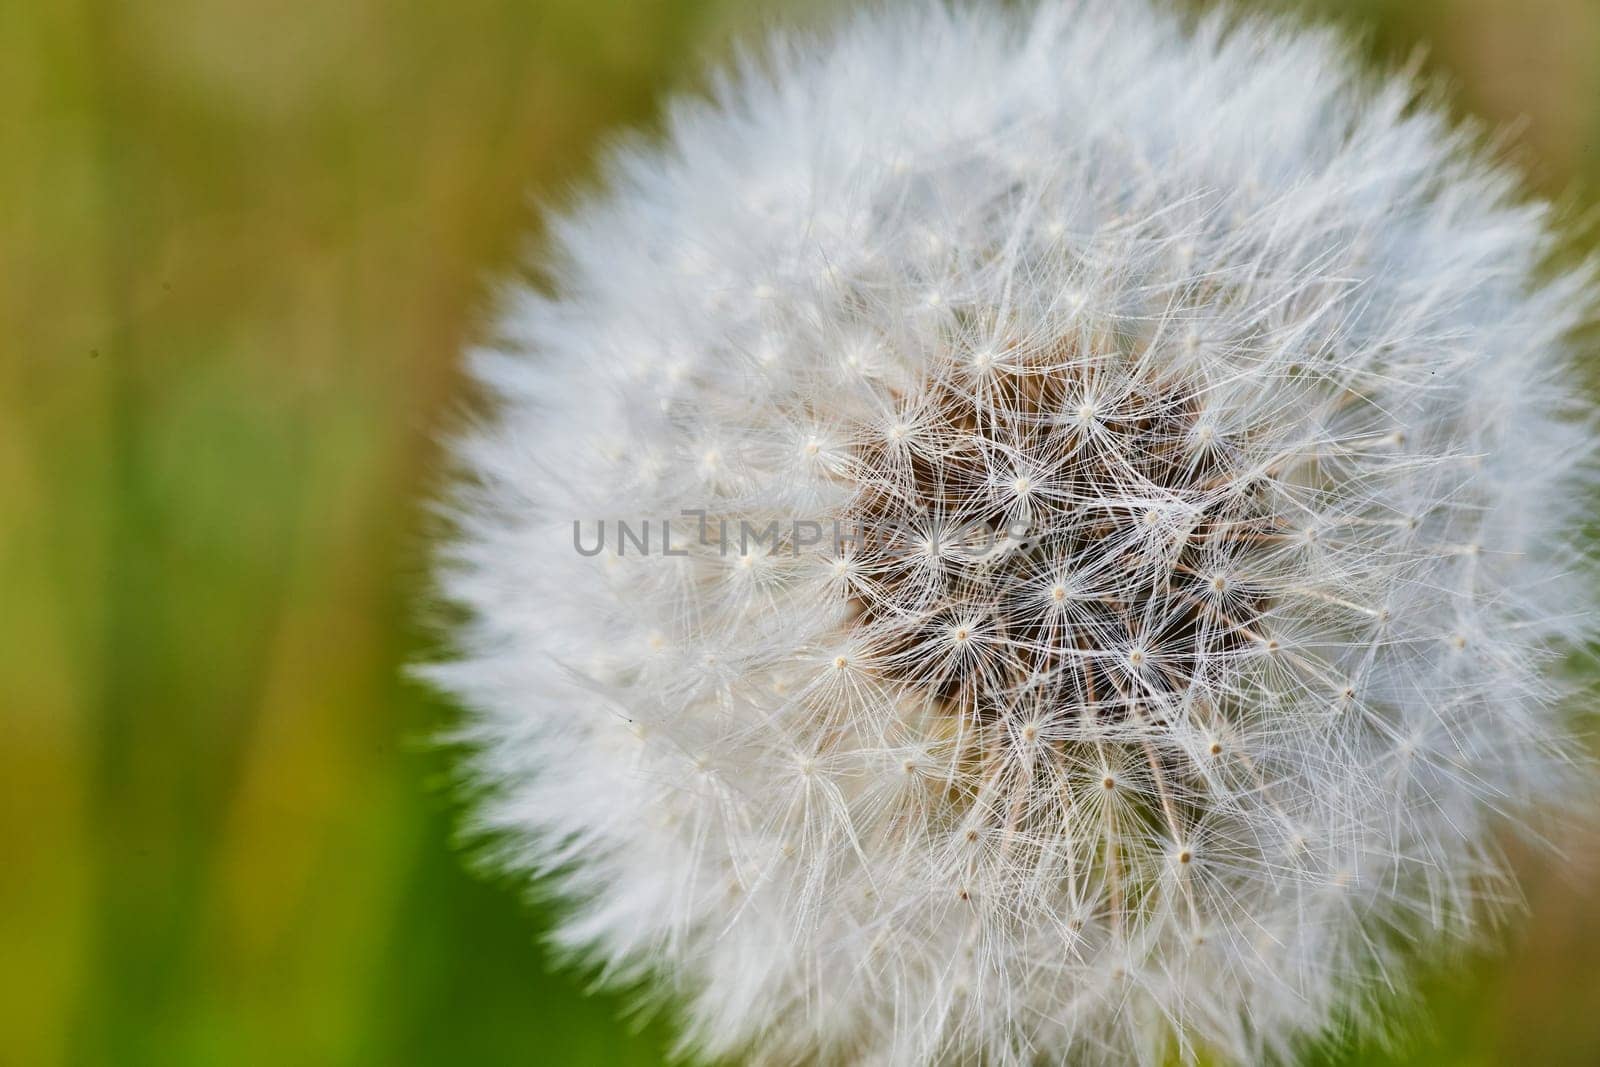 Exquisite macro shot of a dandelion seed head in Fort Wayne, capturing the delicate cycle of nature.